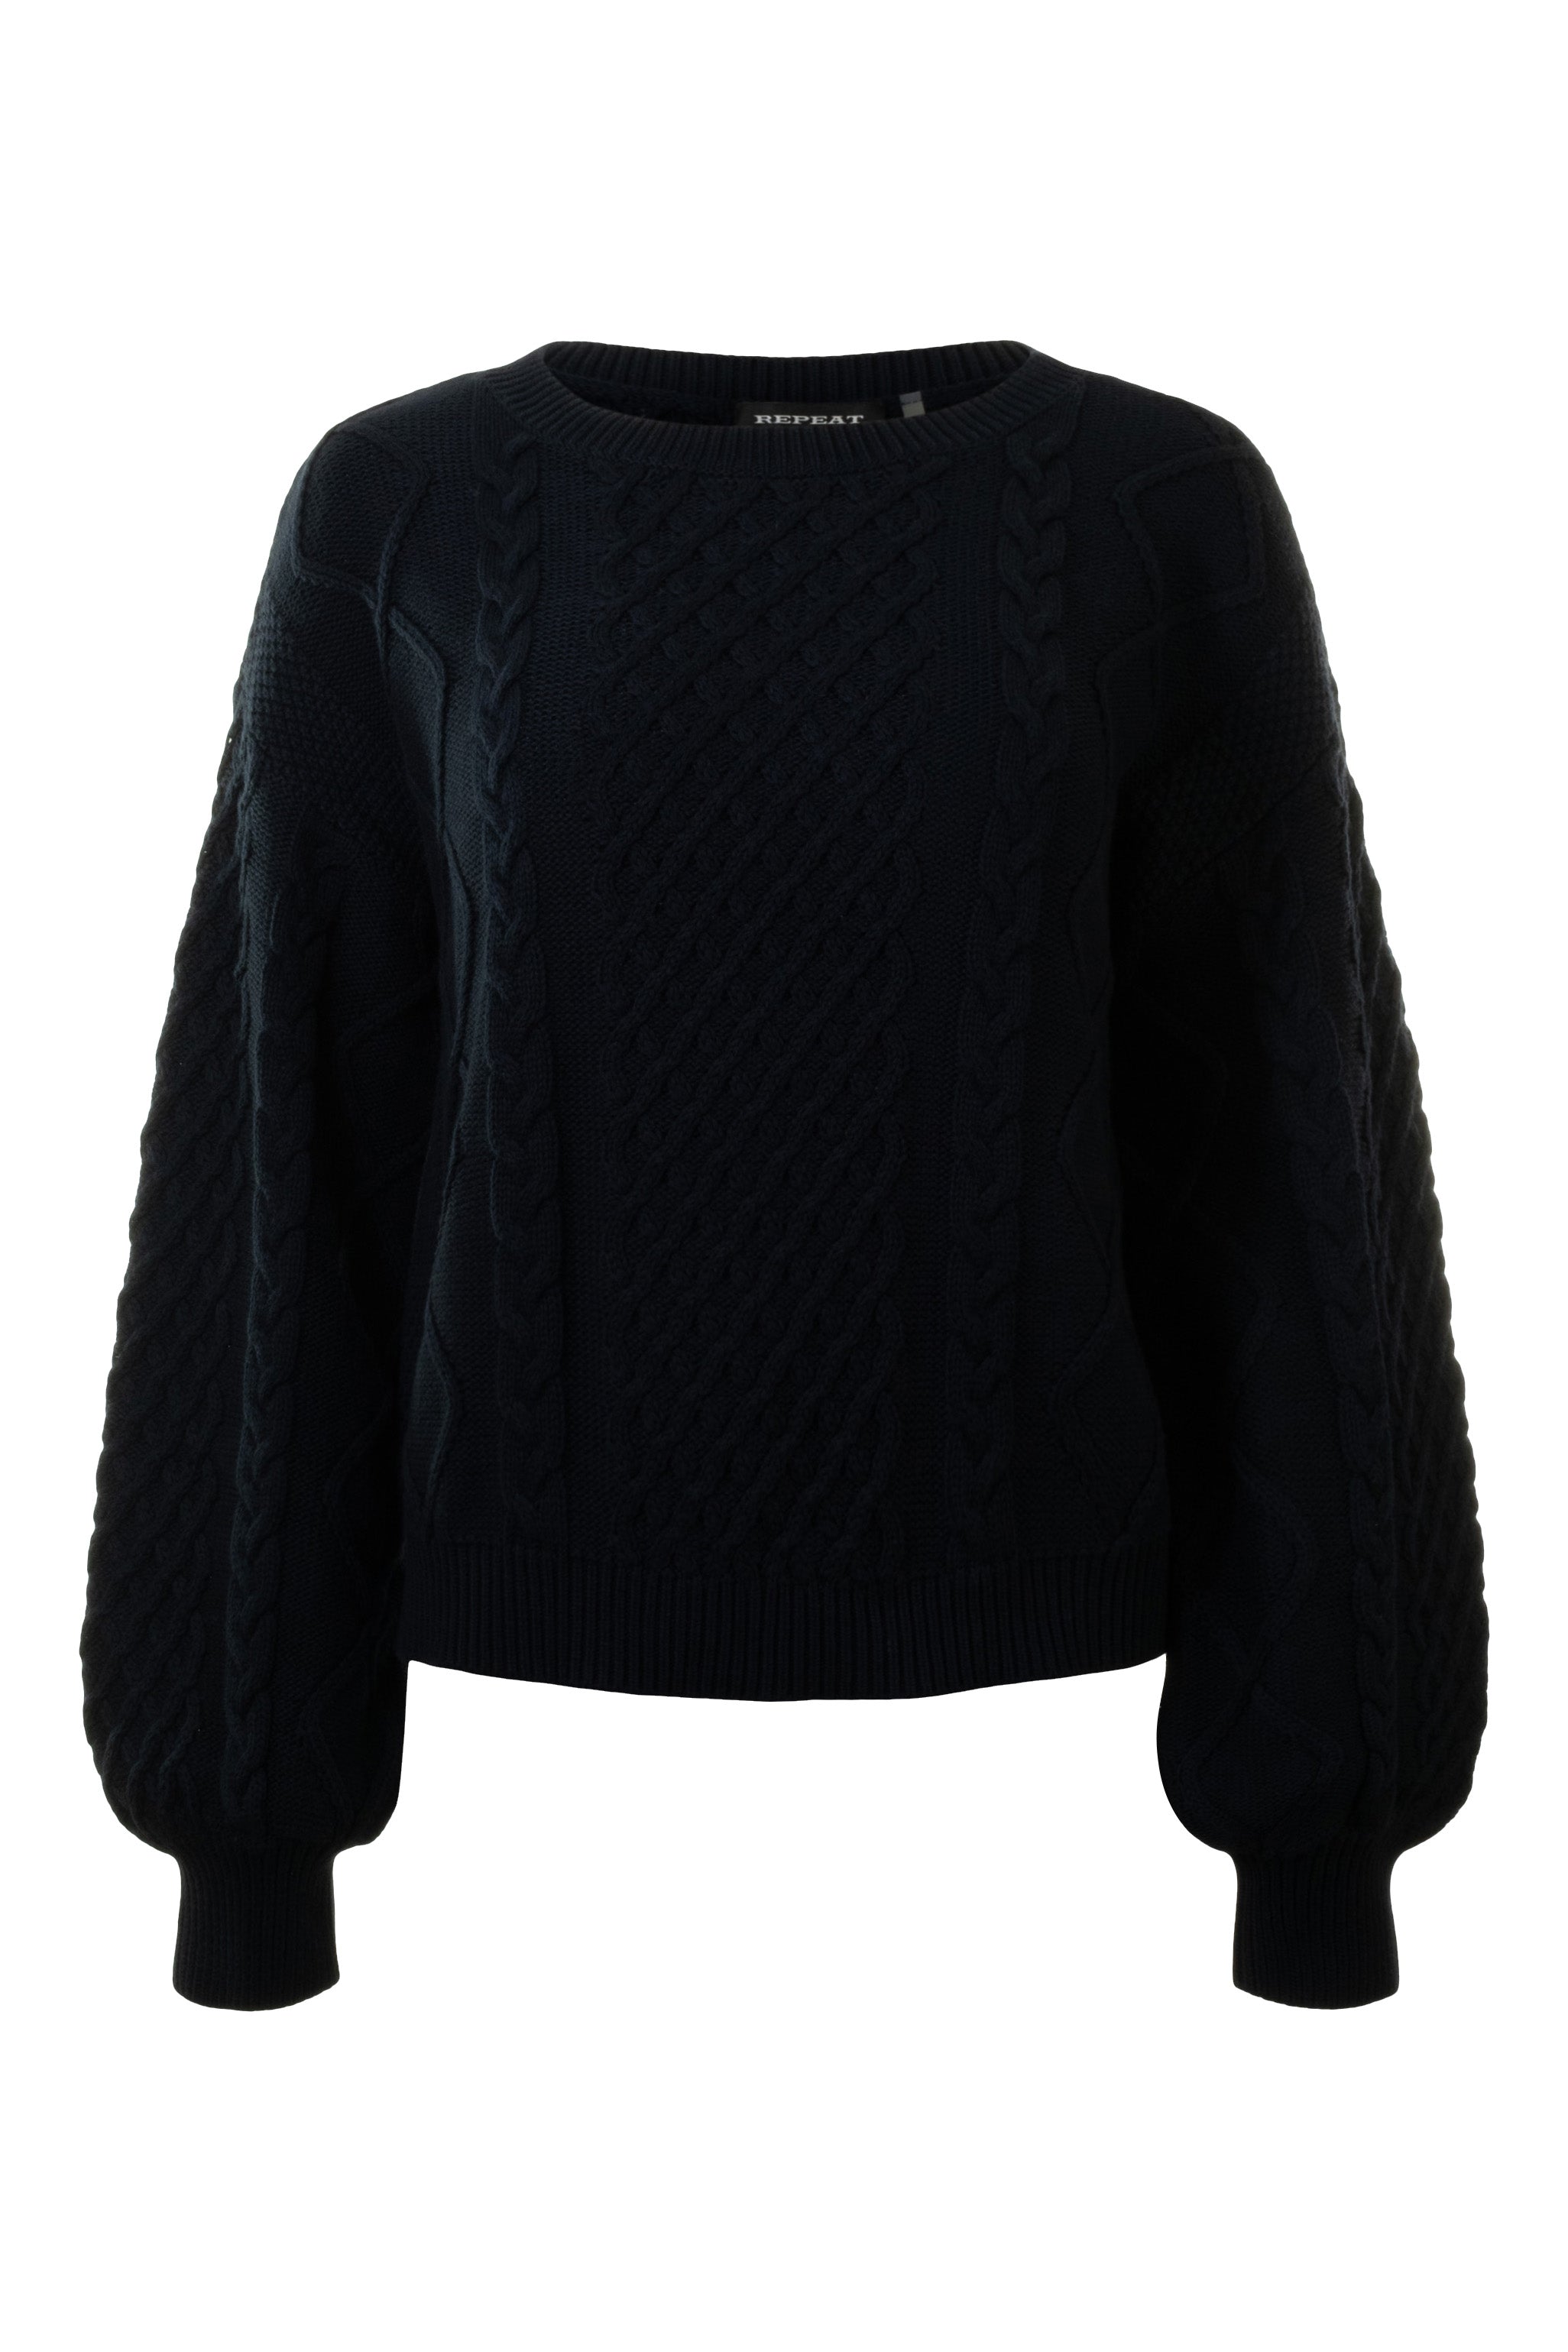 Repeat Cashmere Cotton Cable Textured Crew